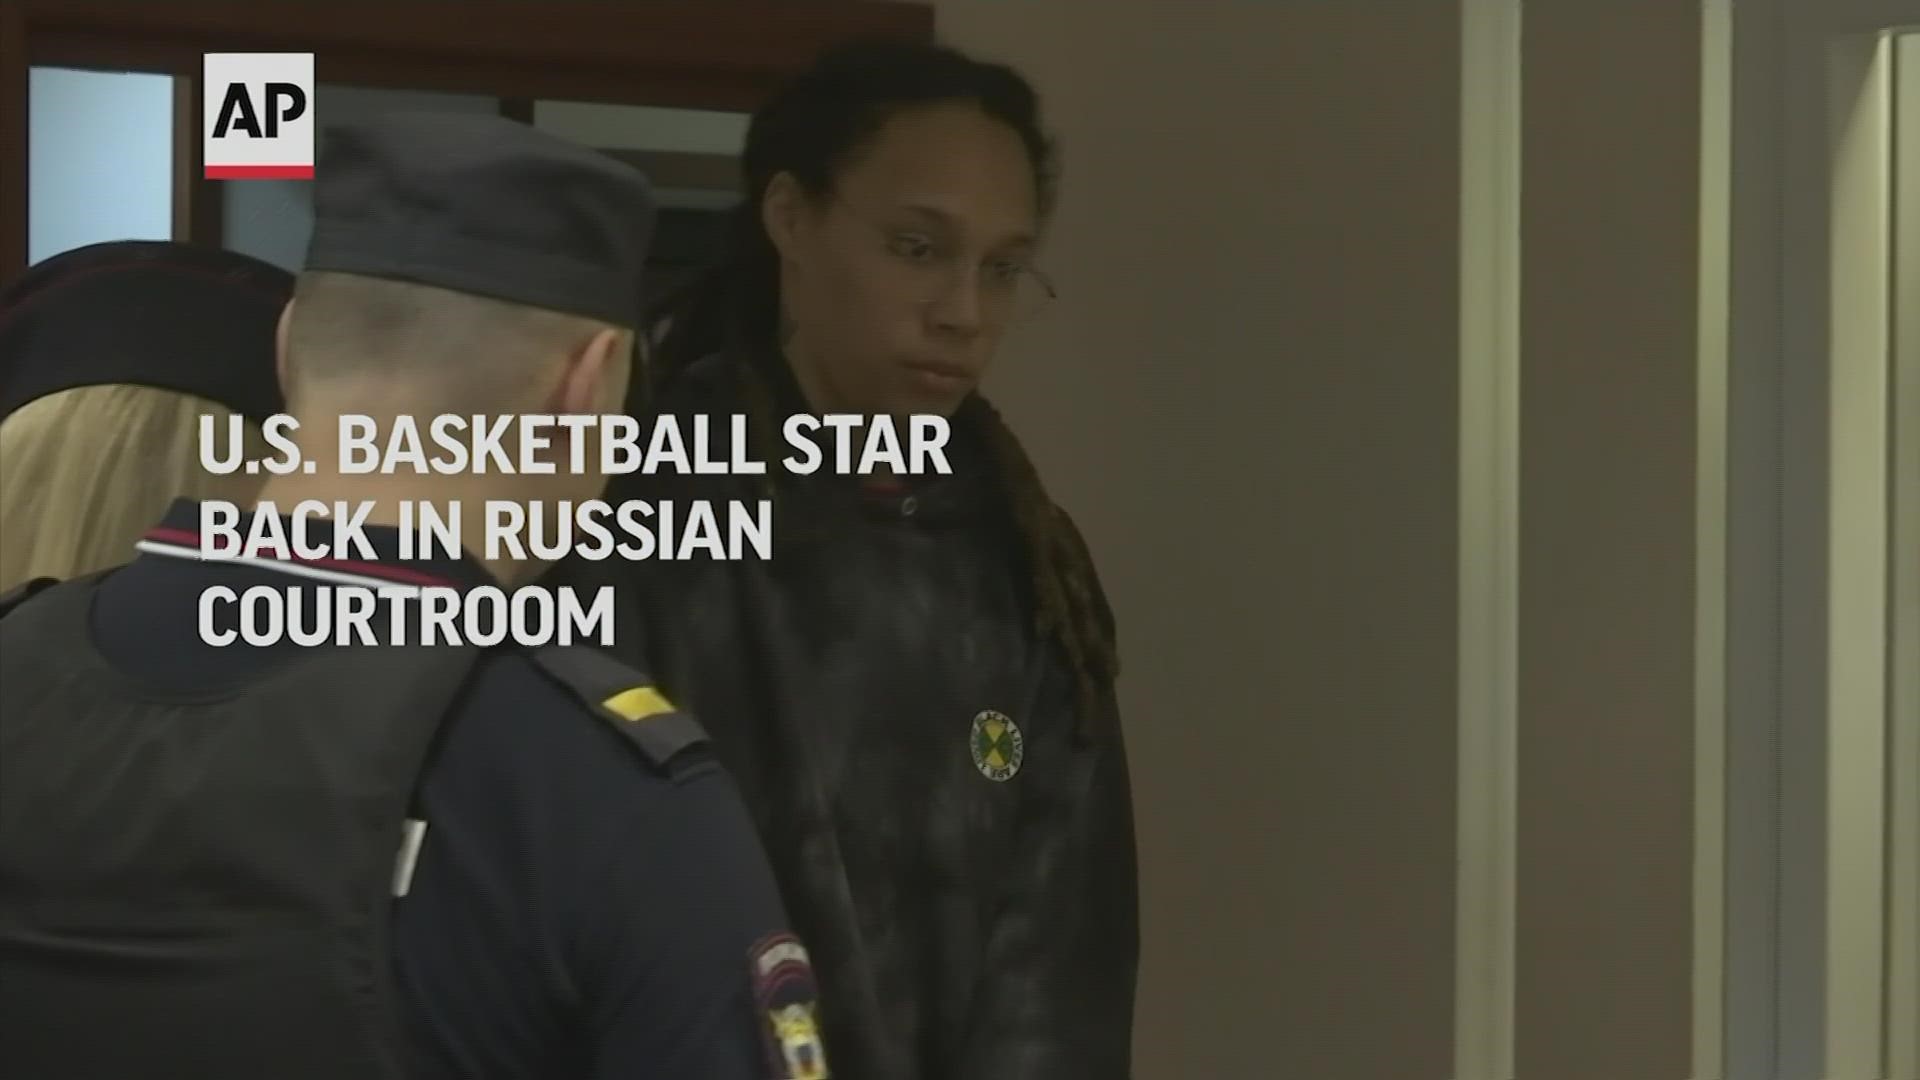 The U.S. basketball star returned to a Russian courtroom Tuesday for her drawn-out trial on drug charges that could bring her 10 years in prison if convicted.